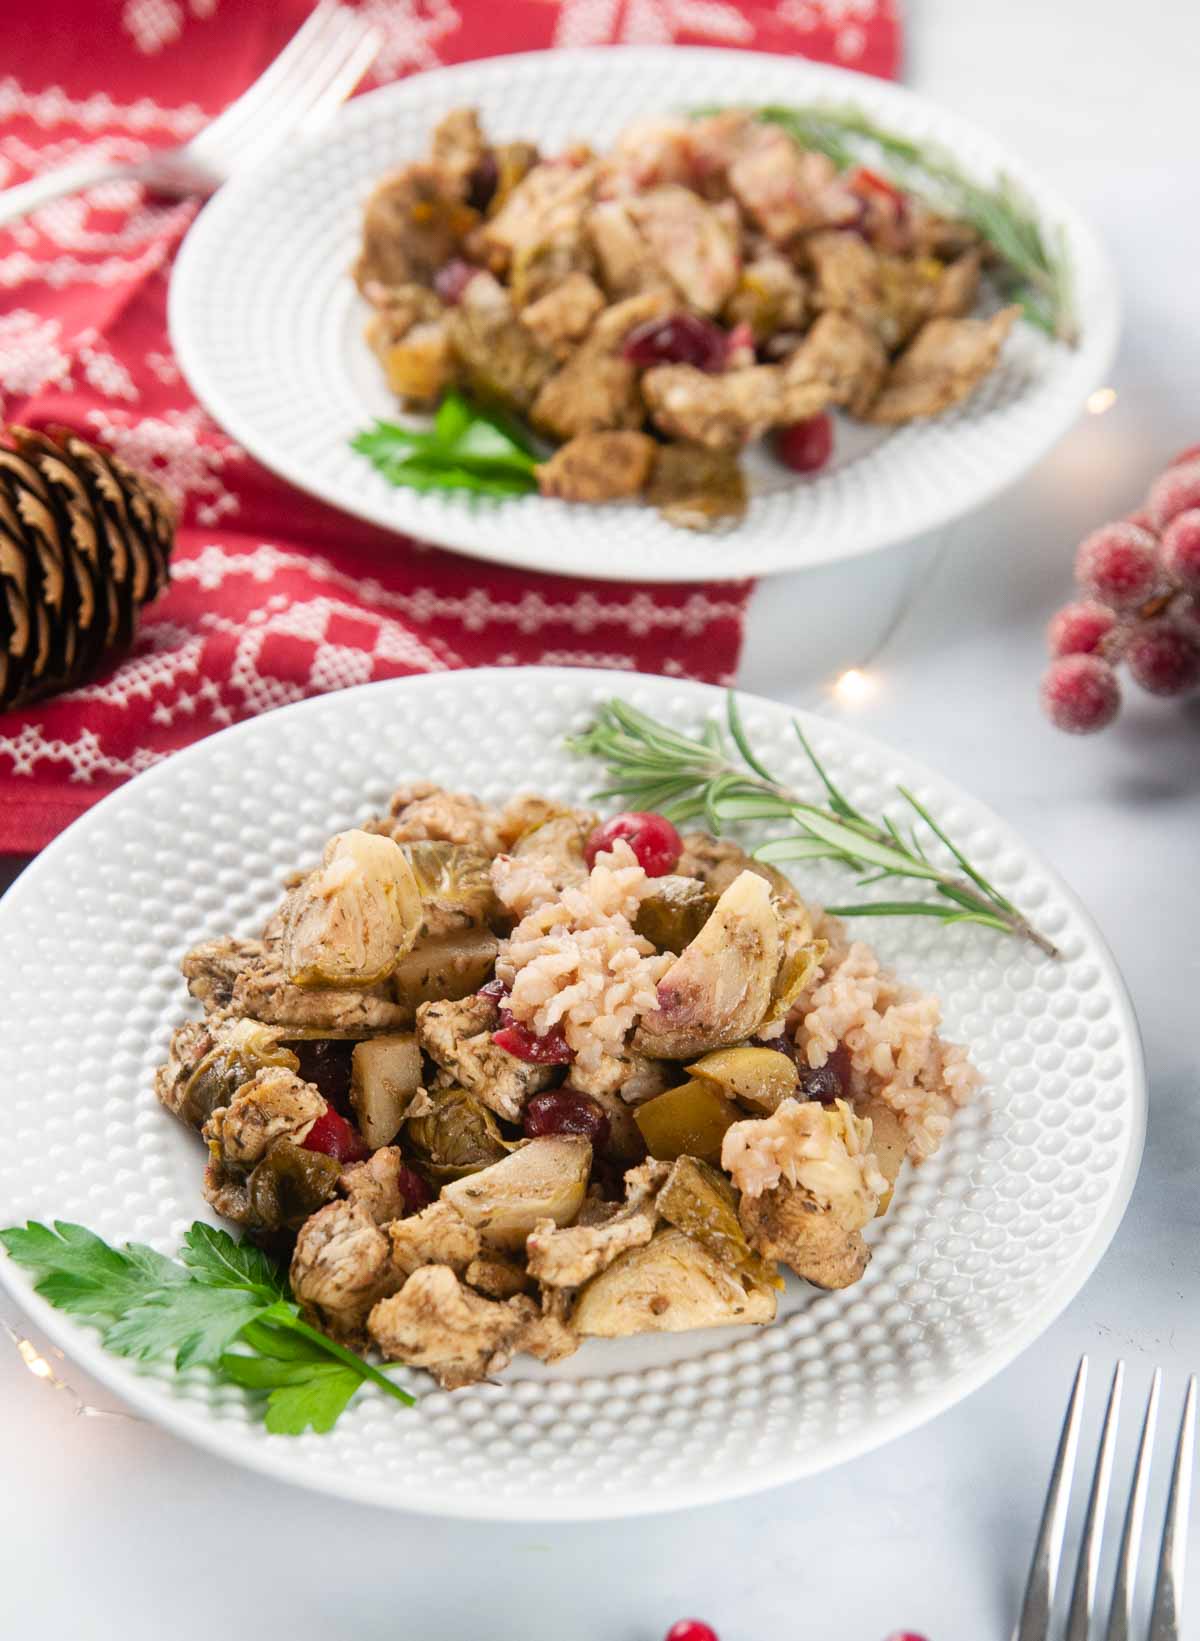 Cranberry Chicken is a festive, one skillet meal featuring tender chicken, juicy apples, Brussels sprouts, tart cranberries, and rice in a tangy sweet marinade.